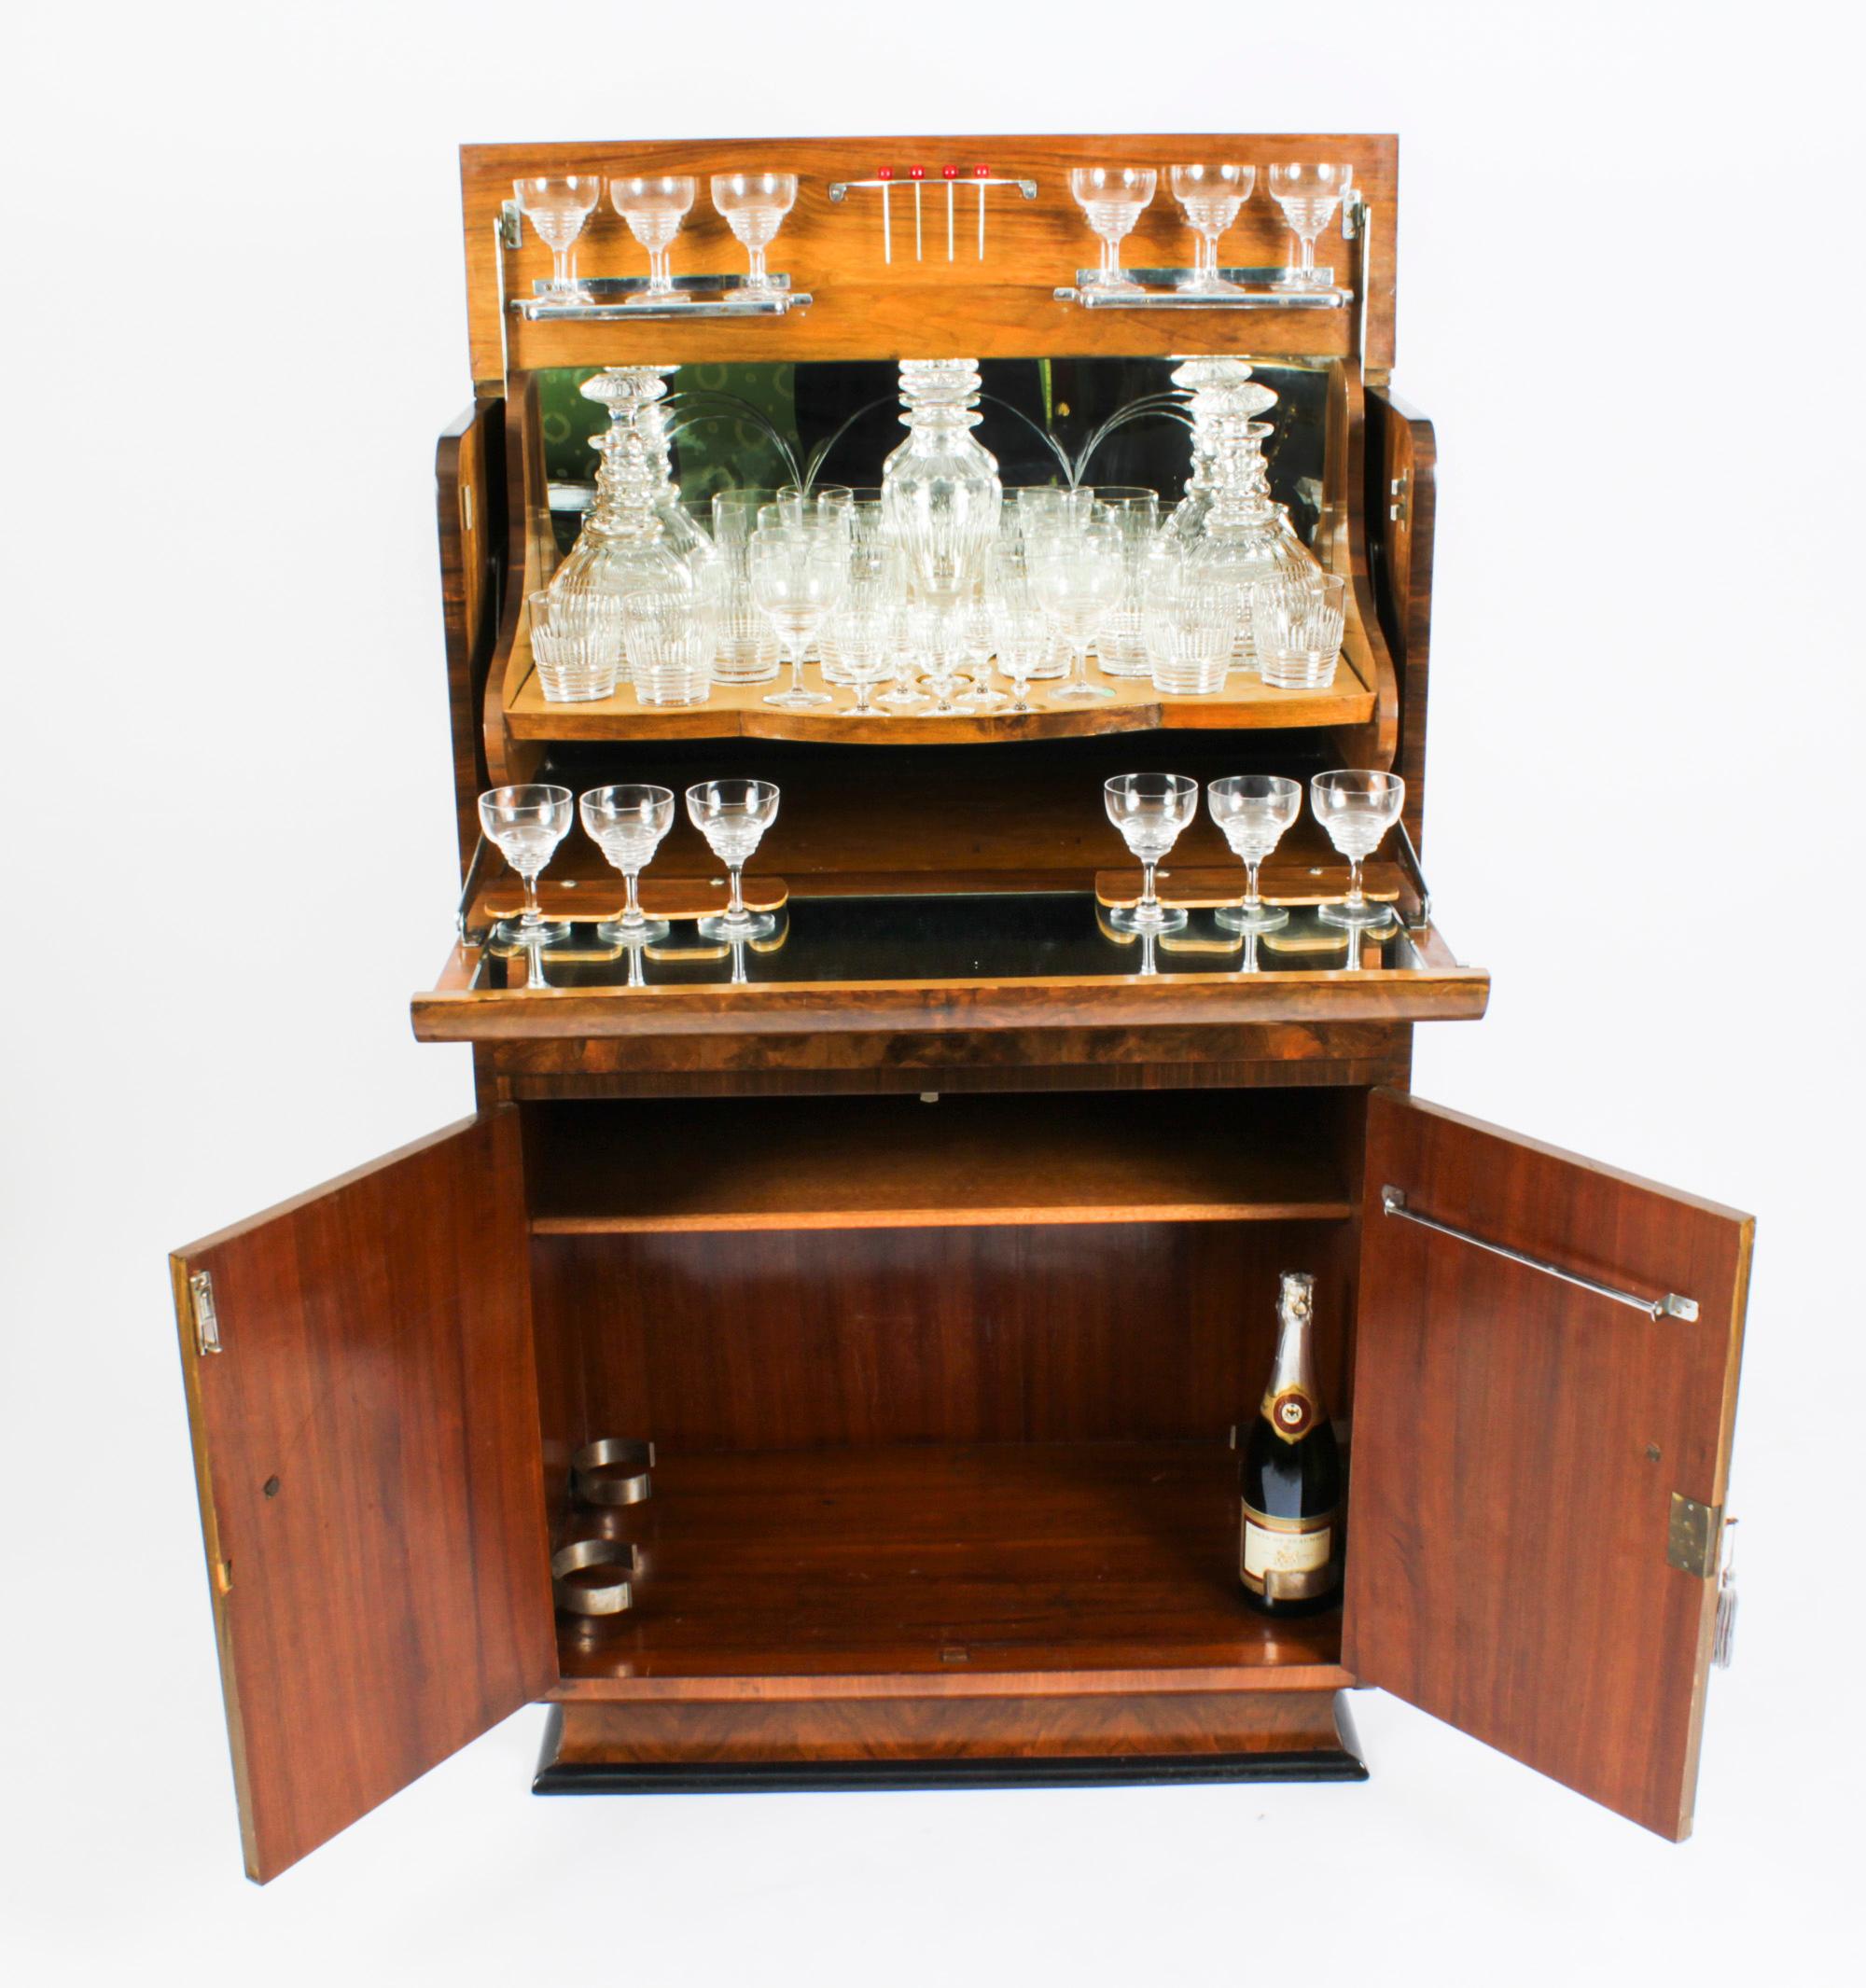 Early 20th Century Antique Art Deco Burr Walnut Cocktail Cabinet Dry Bar & Glassware, 1920s